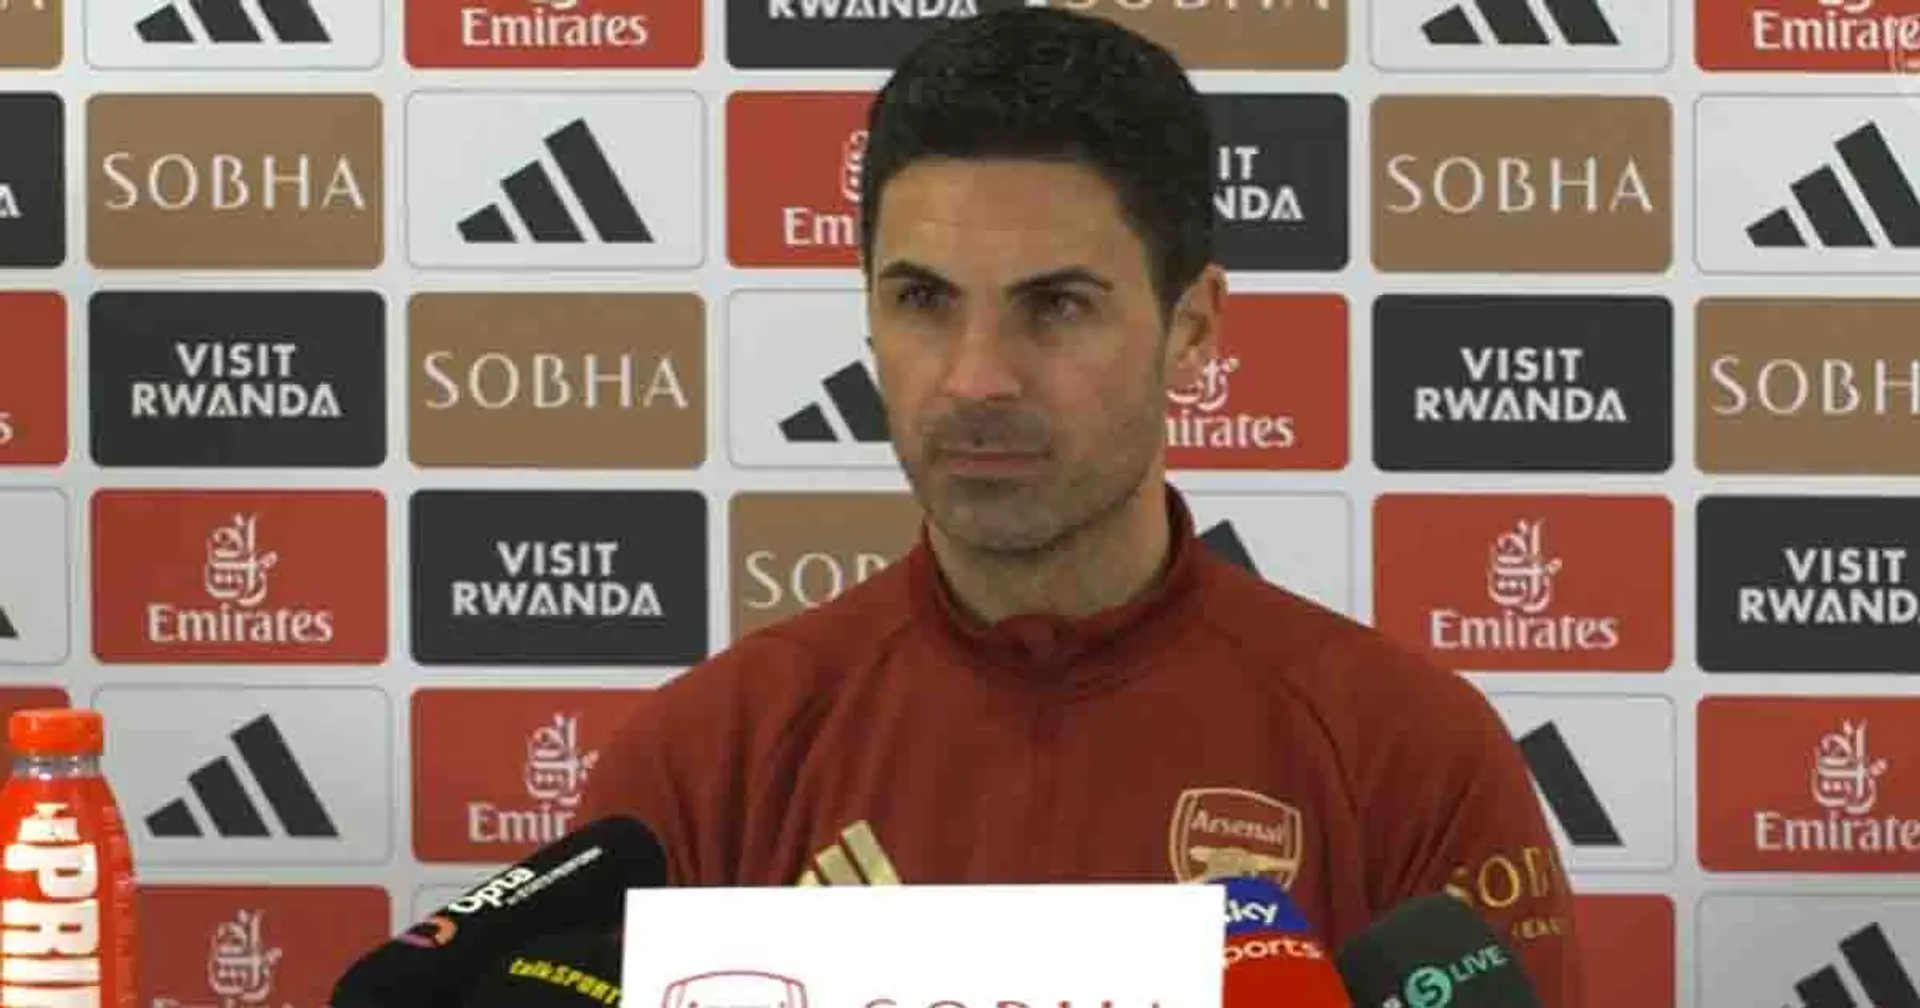 'The context is clear': Arteta reflects on Arsenal's recent form ahead of Wolves trip